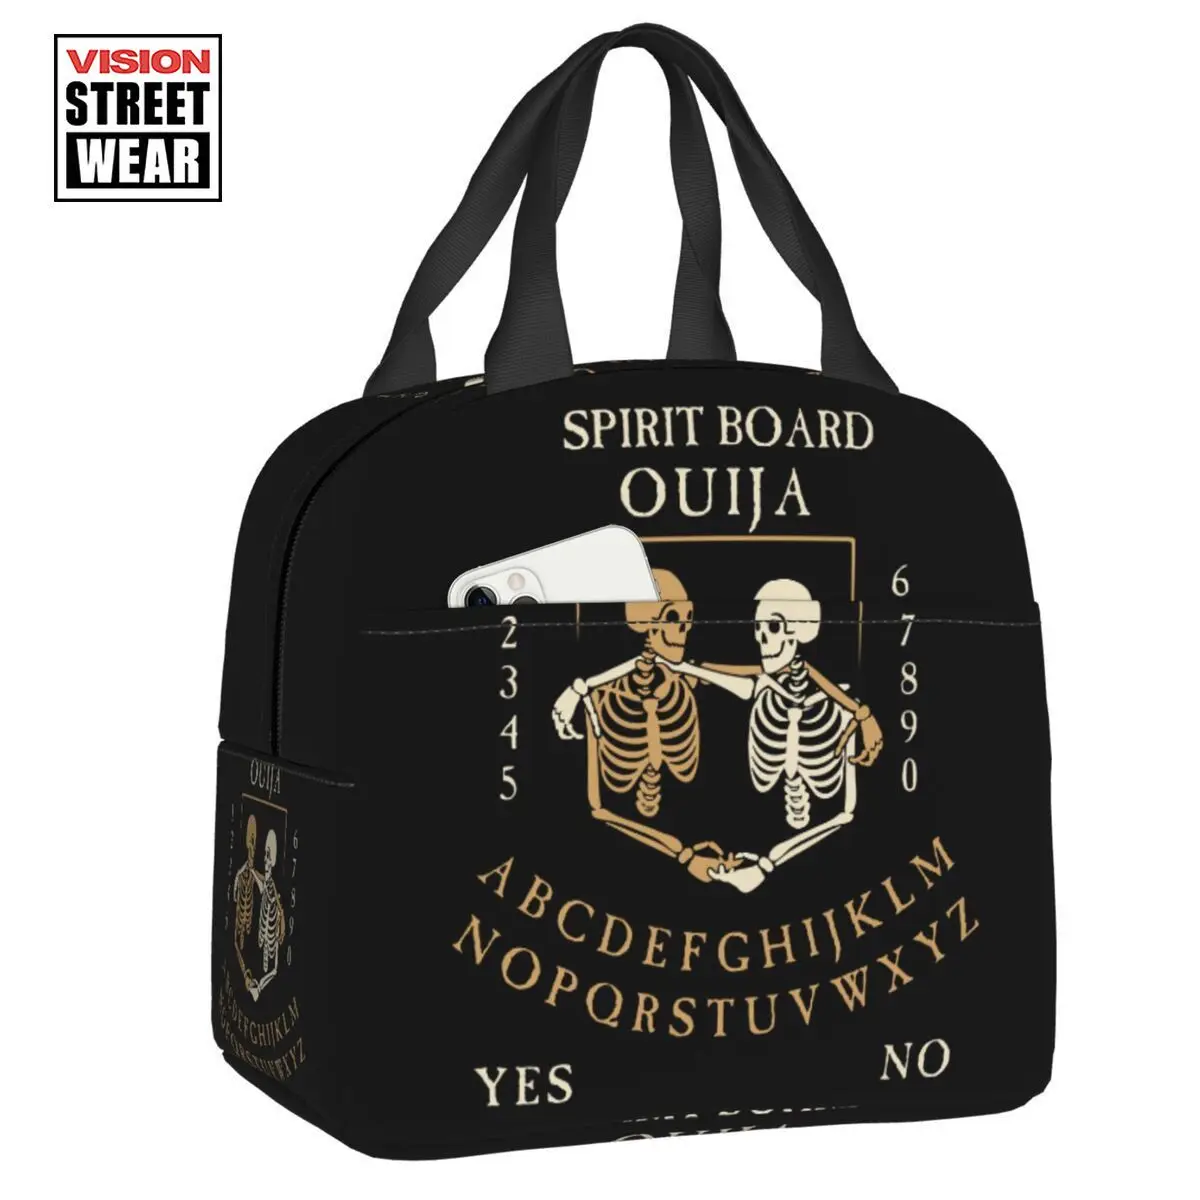 

2023 New Spirit Board Ouija With Skeletons Thermal Insulated Lunch Bag Lunch Tote For Kids School Children Storage Food Box